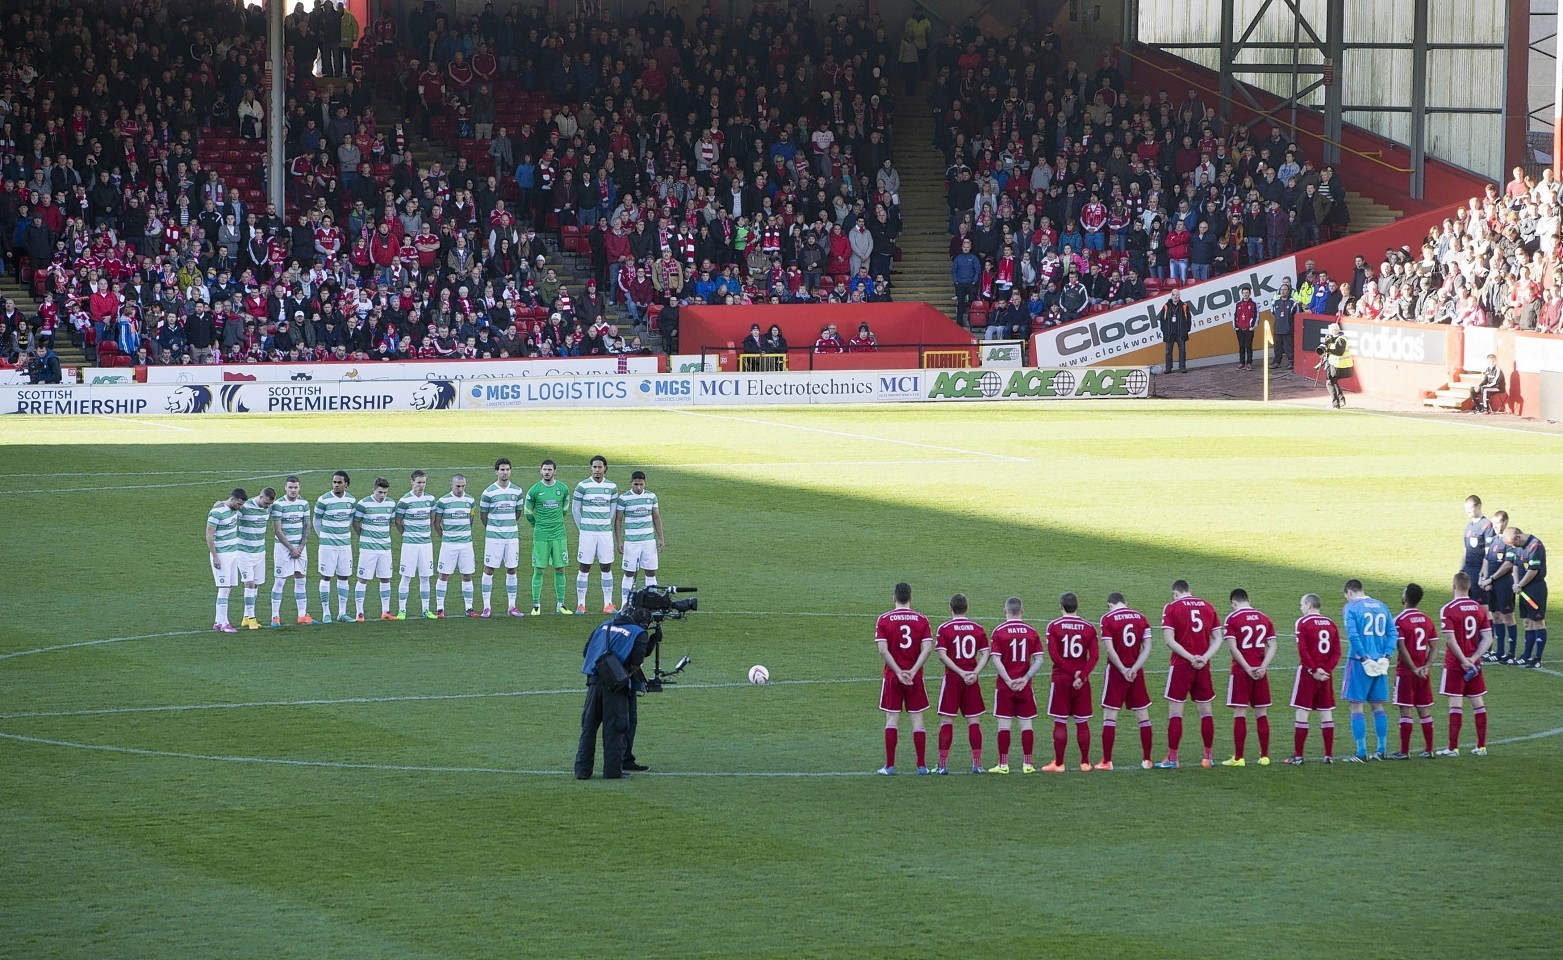 The players paid their respects before the match.